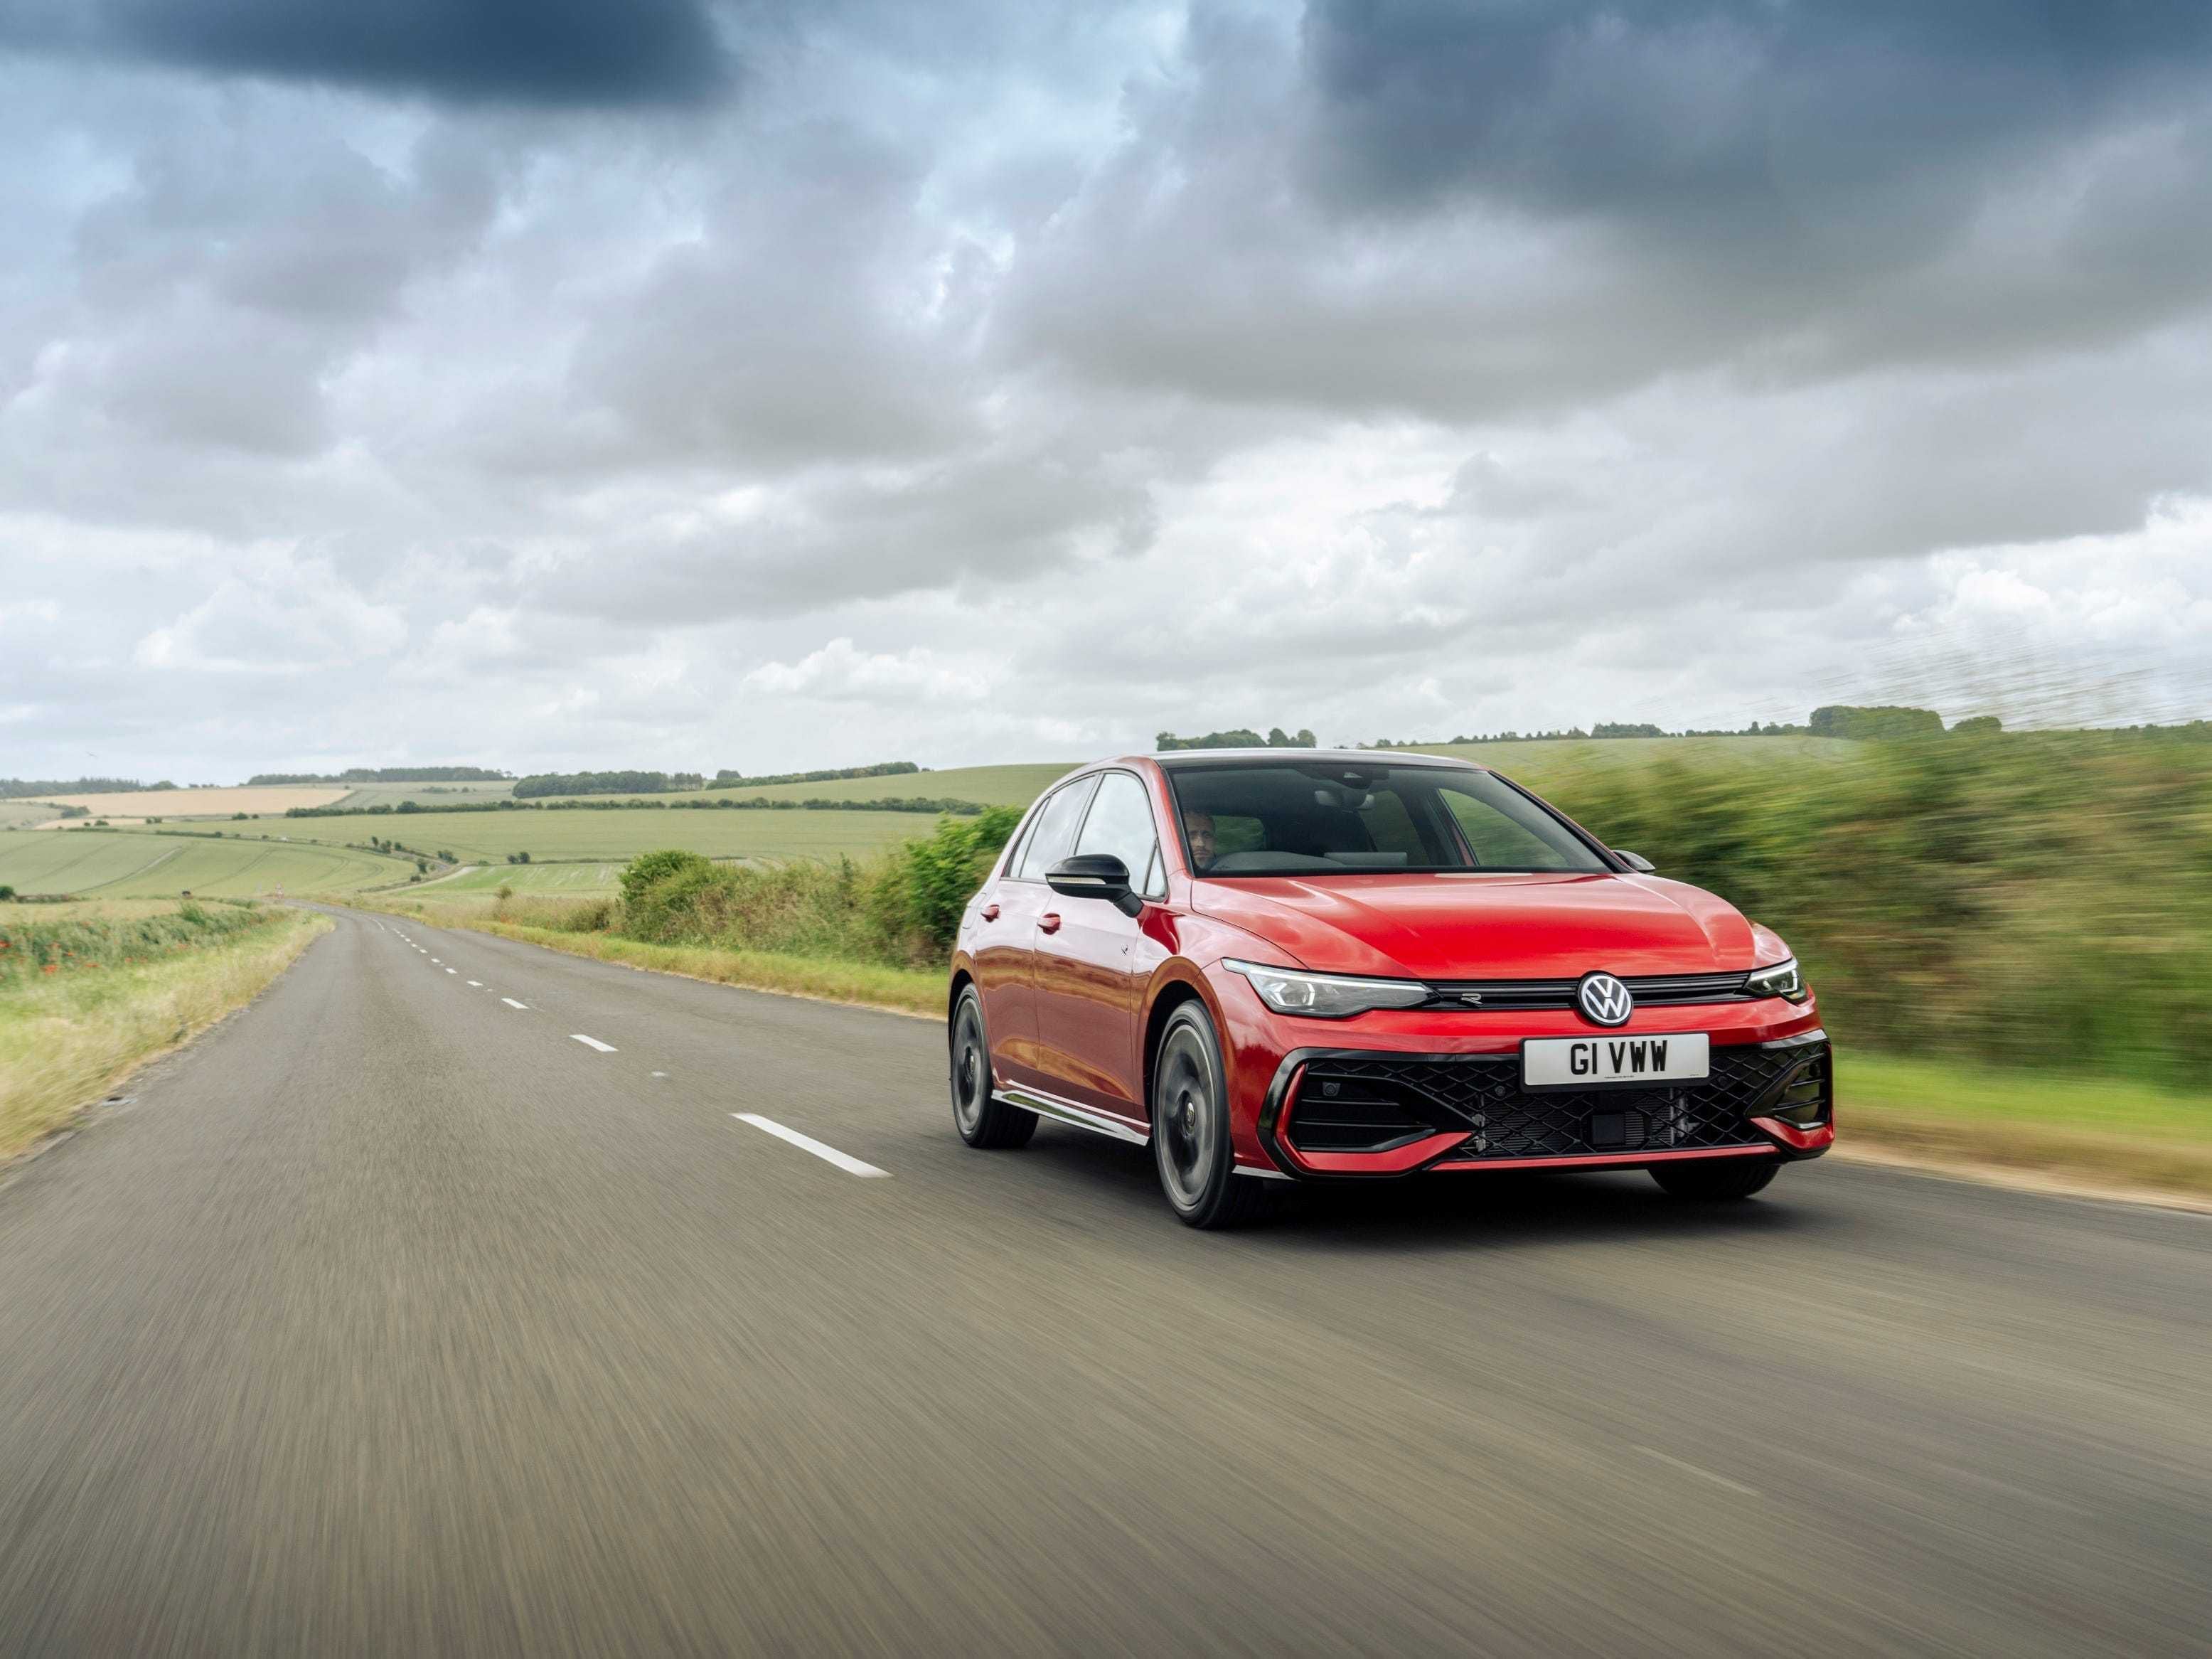 UK drive: The Golf receives a facelift to keep it in-line with its rivals